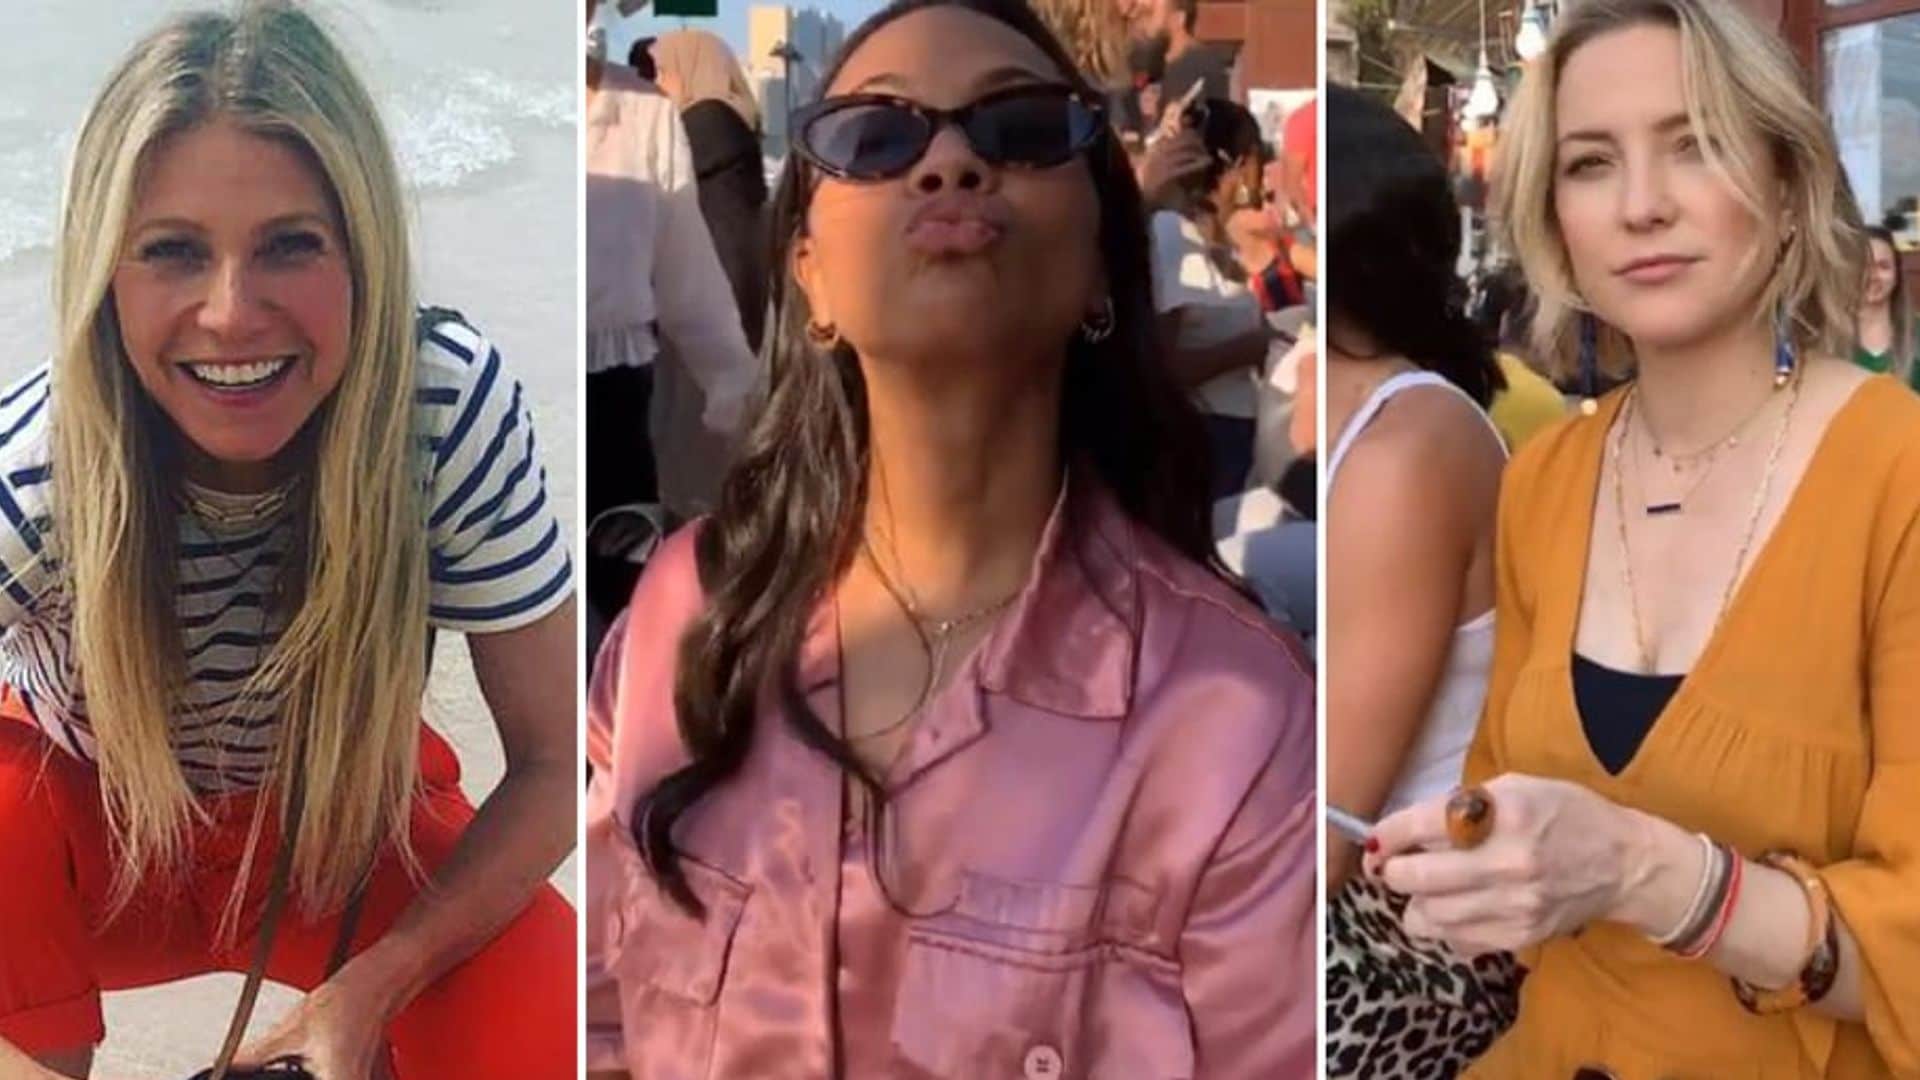 Zoe Saldana is currently living her best life in Dubai with Gwyneth Paltrow and Kate Hudson